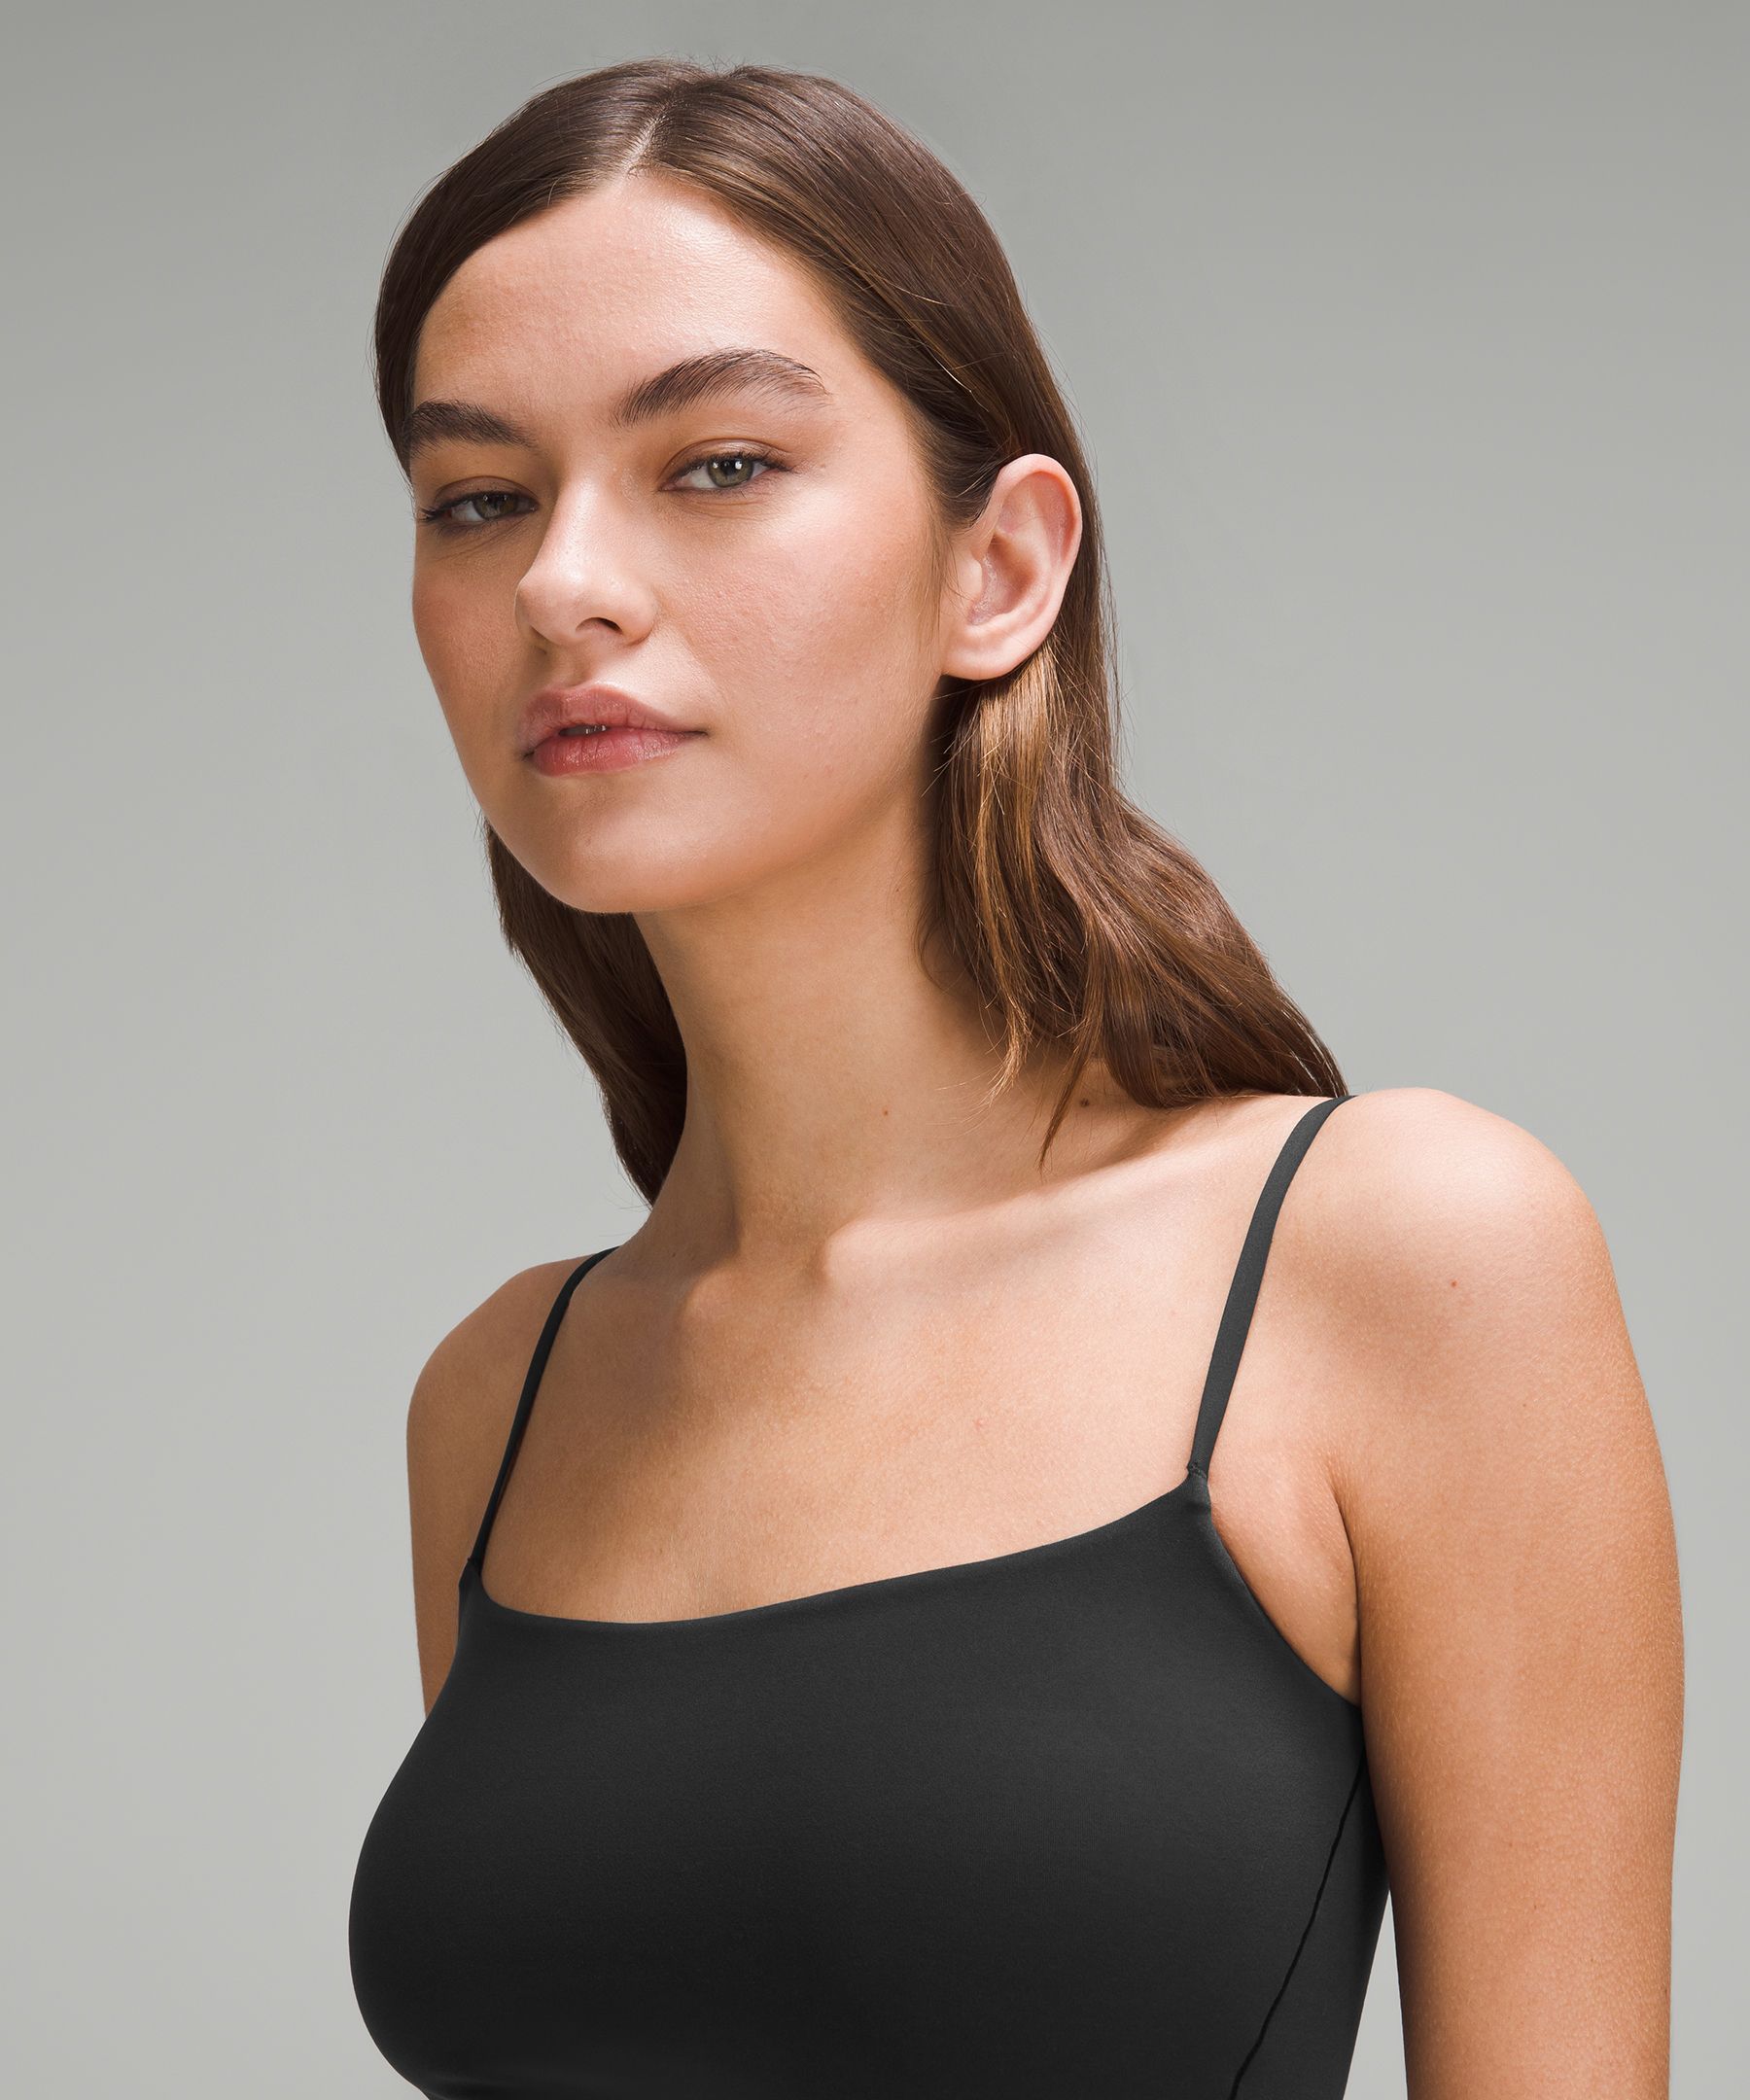 Women's Solid Seamless Camisole. • Spaghetti straps • Seamless design for  extra comfort • Longline hem • Soft and stretchy • Curve-Hugging • Body  Contouring • Perfect for layering under sheer tops